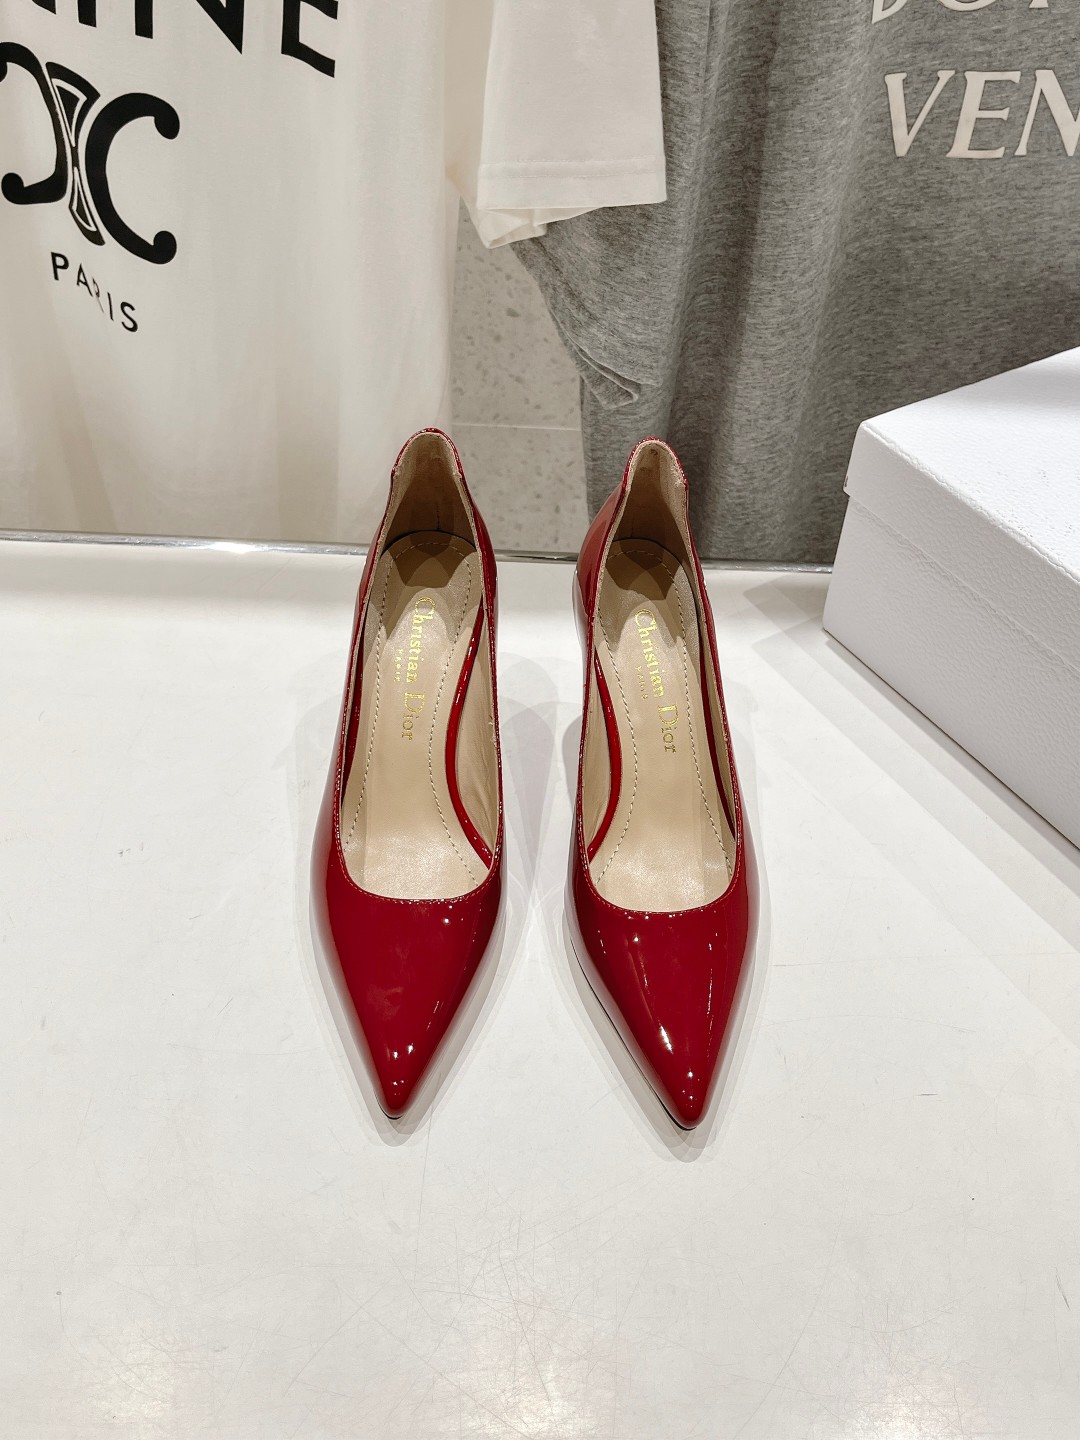 Dior High Heel Pumps Single Layer Shoes Genuine Leather Patent Sheepskin Fall Collection